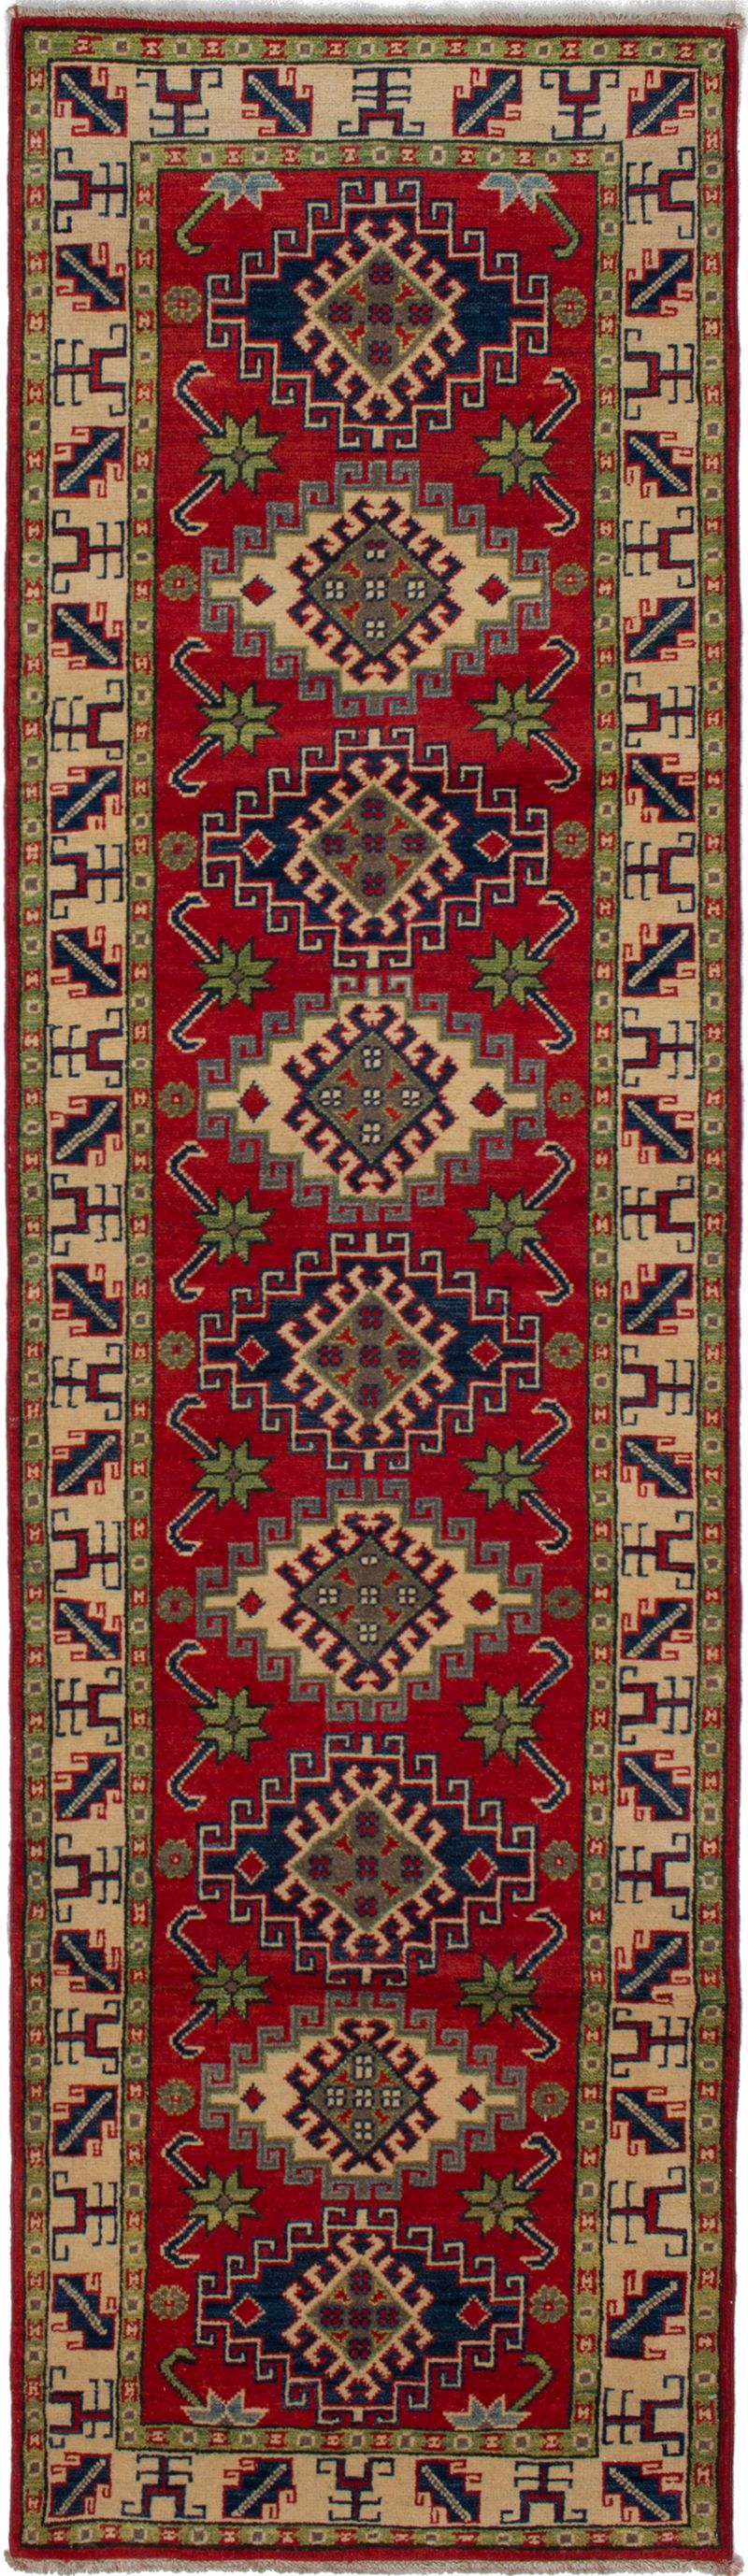 Hand-knotted Finest Gazni Red Wool Rug 2'8" x 9'10"  Size: 2'8" x 9'10"  